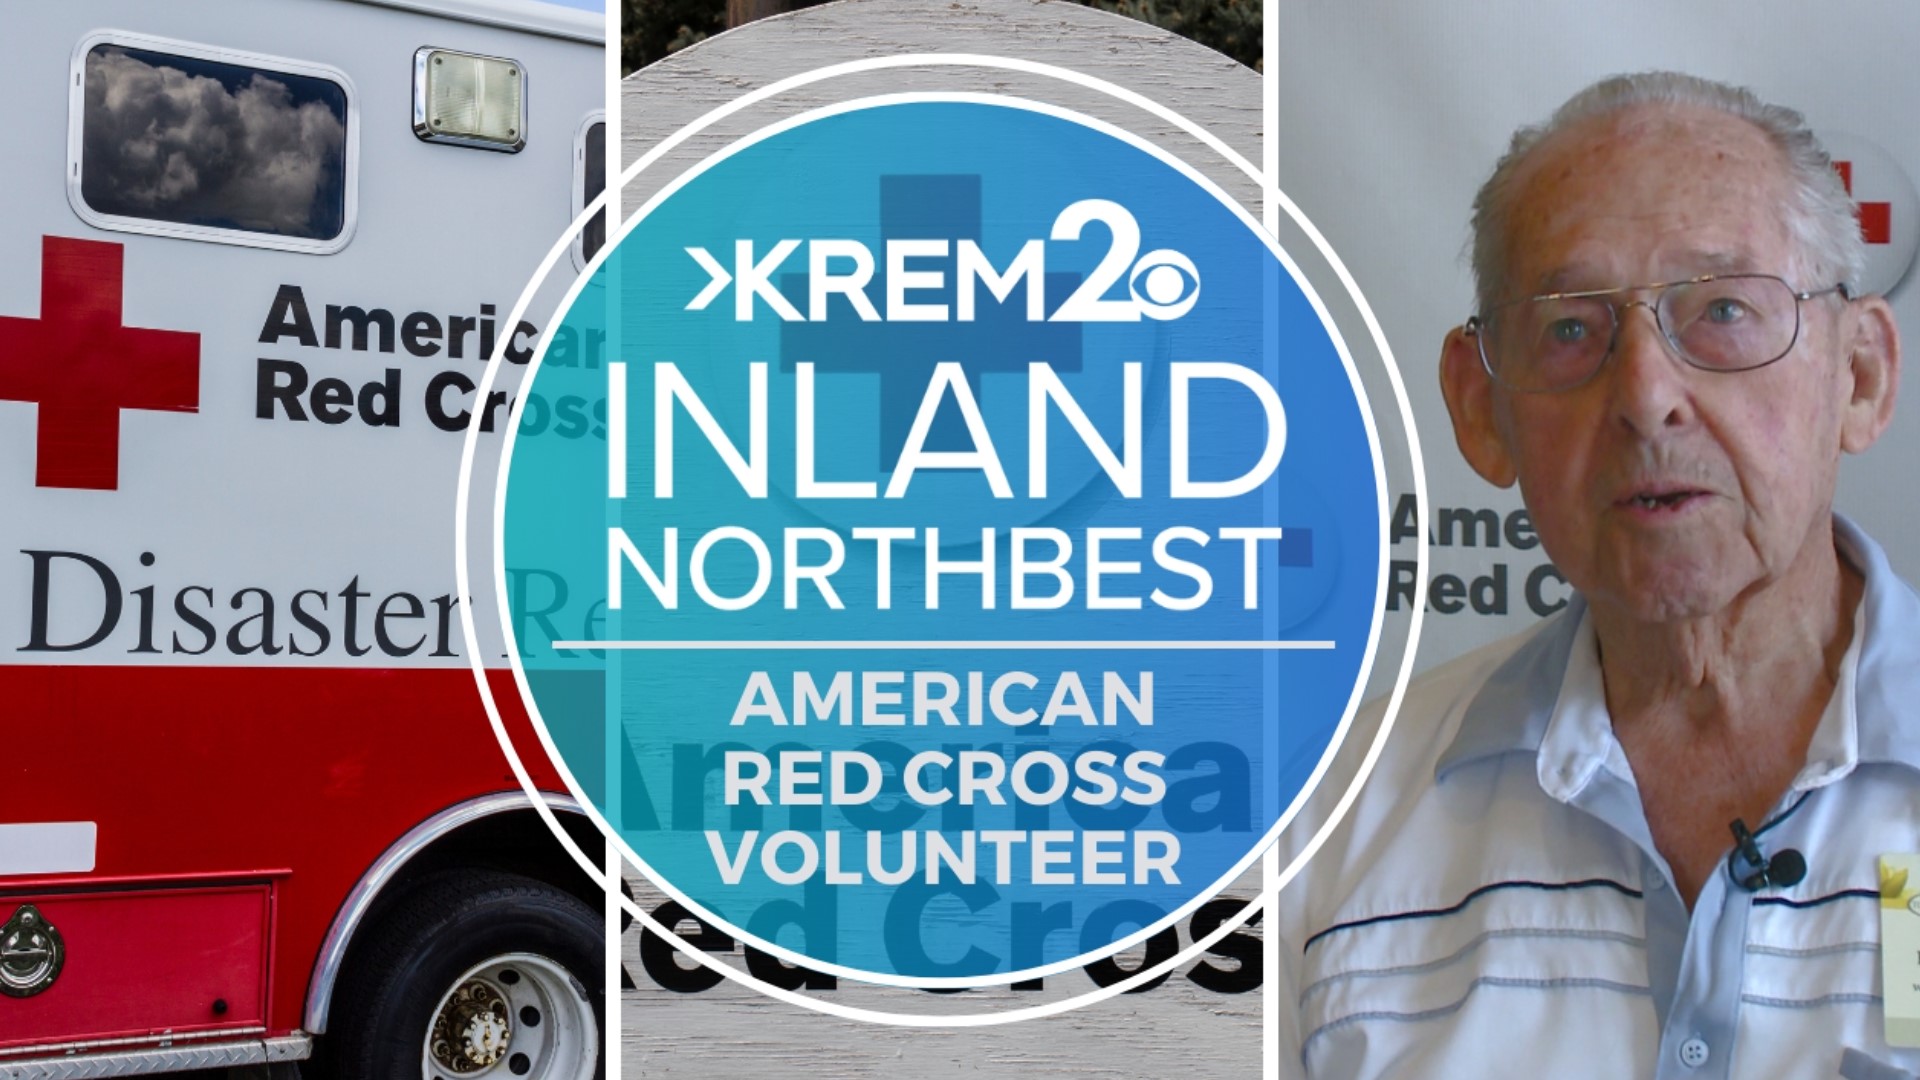 The Touchmark resident has continually volunteered 30 hours a month with the Inland Northwest Chapter of the American Red Cross.